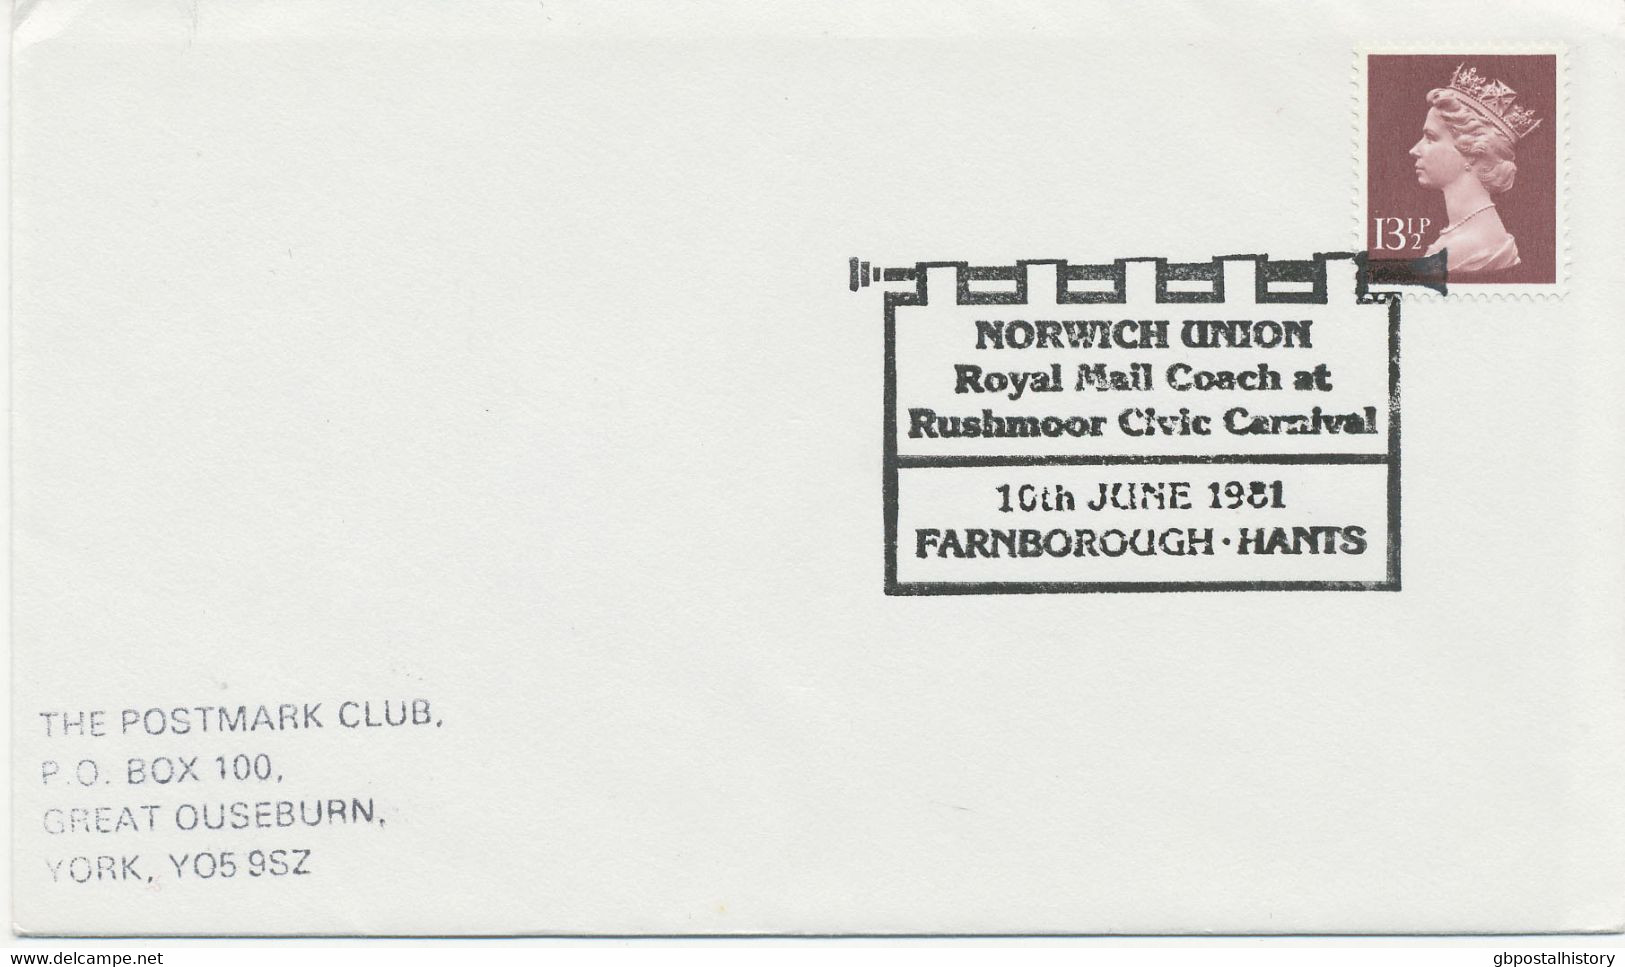 GB SPECIAL EVENT POSTMARK NORWICH UNION - Royal Mail Coach At Rushmoor Civic Carnival - 10th JUNE 1981 - FARNBOROUGH - H - Diligenze